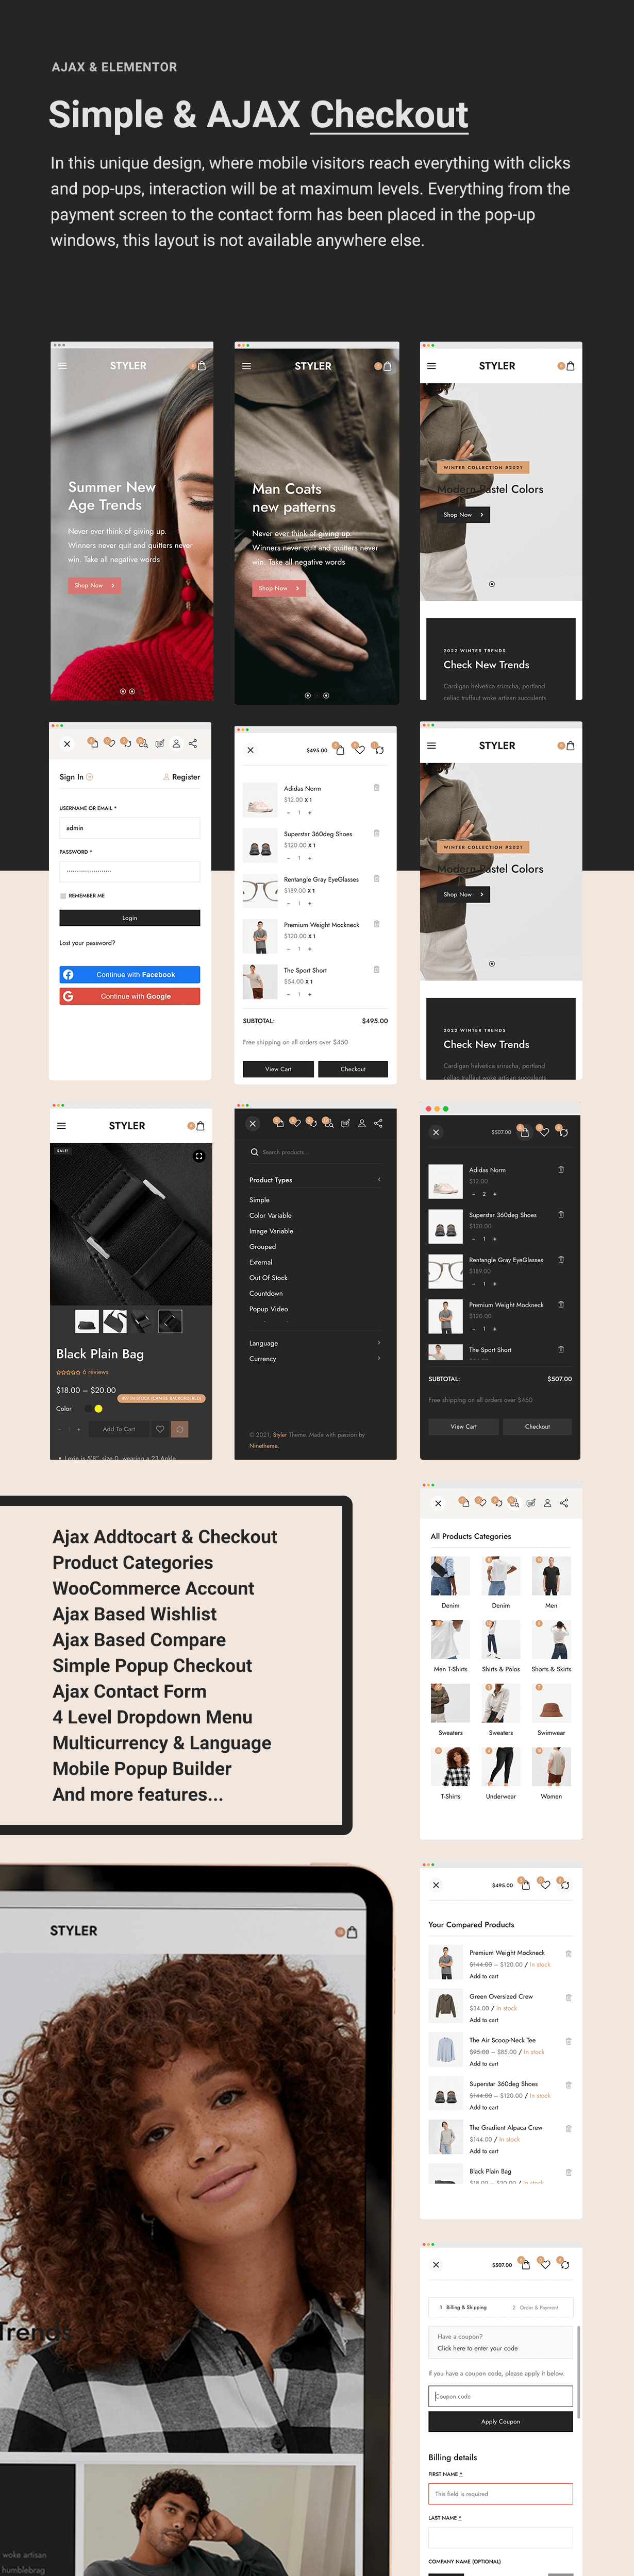 Styler - Best Rated Responsive Mobile Focused WooCommerce Theme